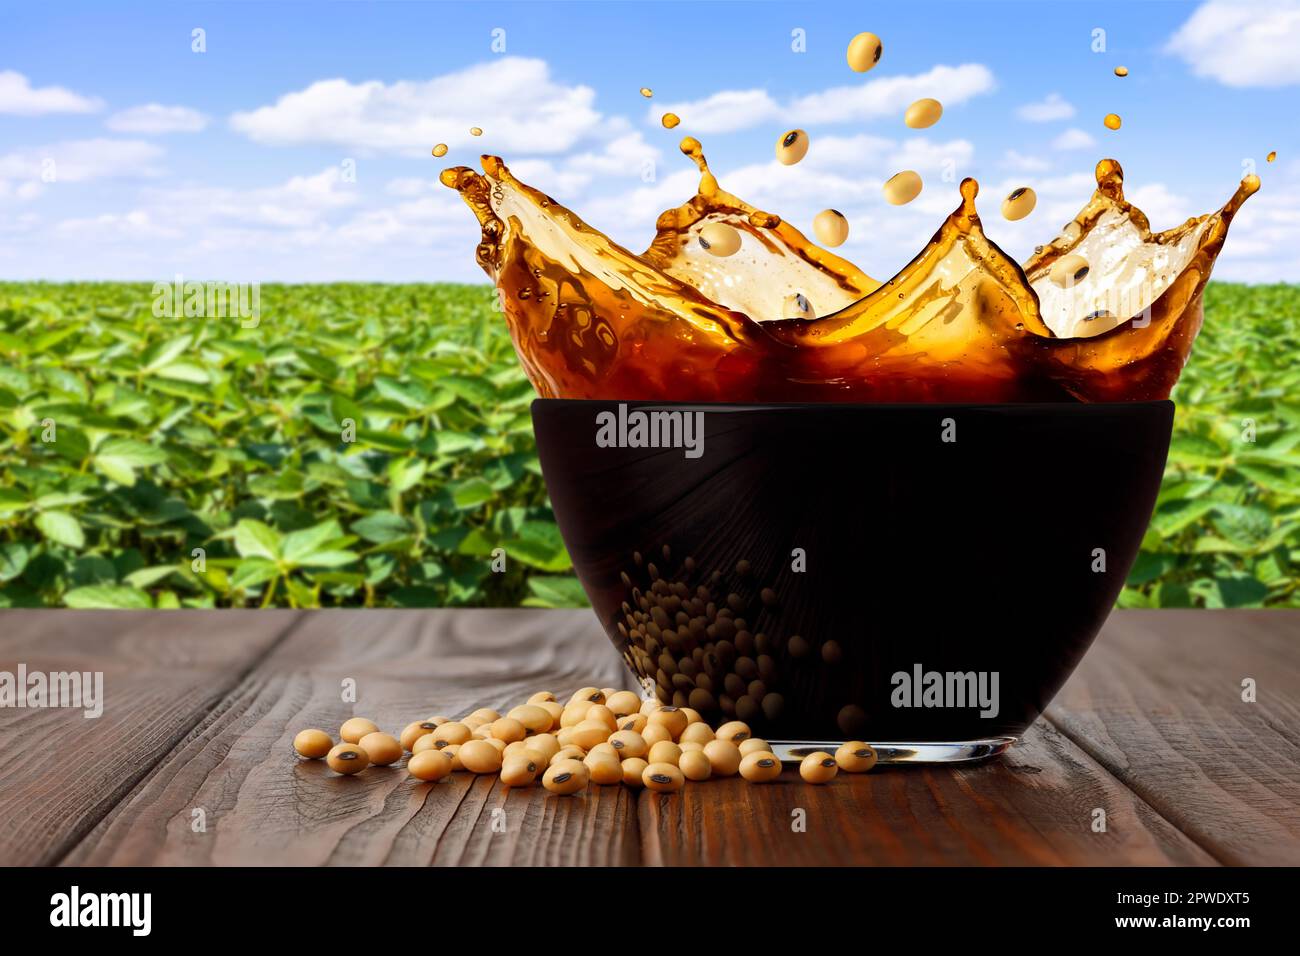 splashing soy sauce in glass bowl on table with green soybean field as background Stock Photo